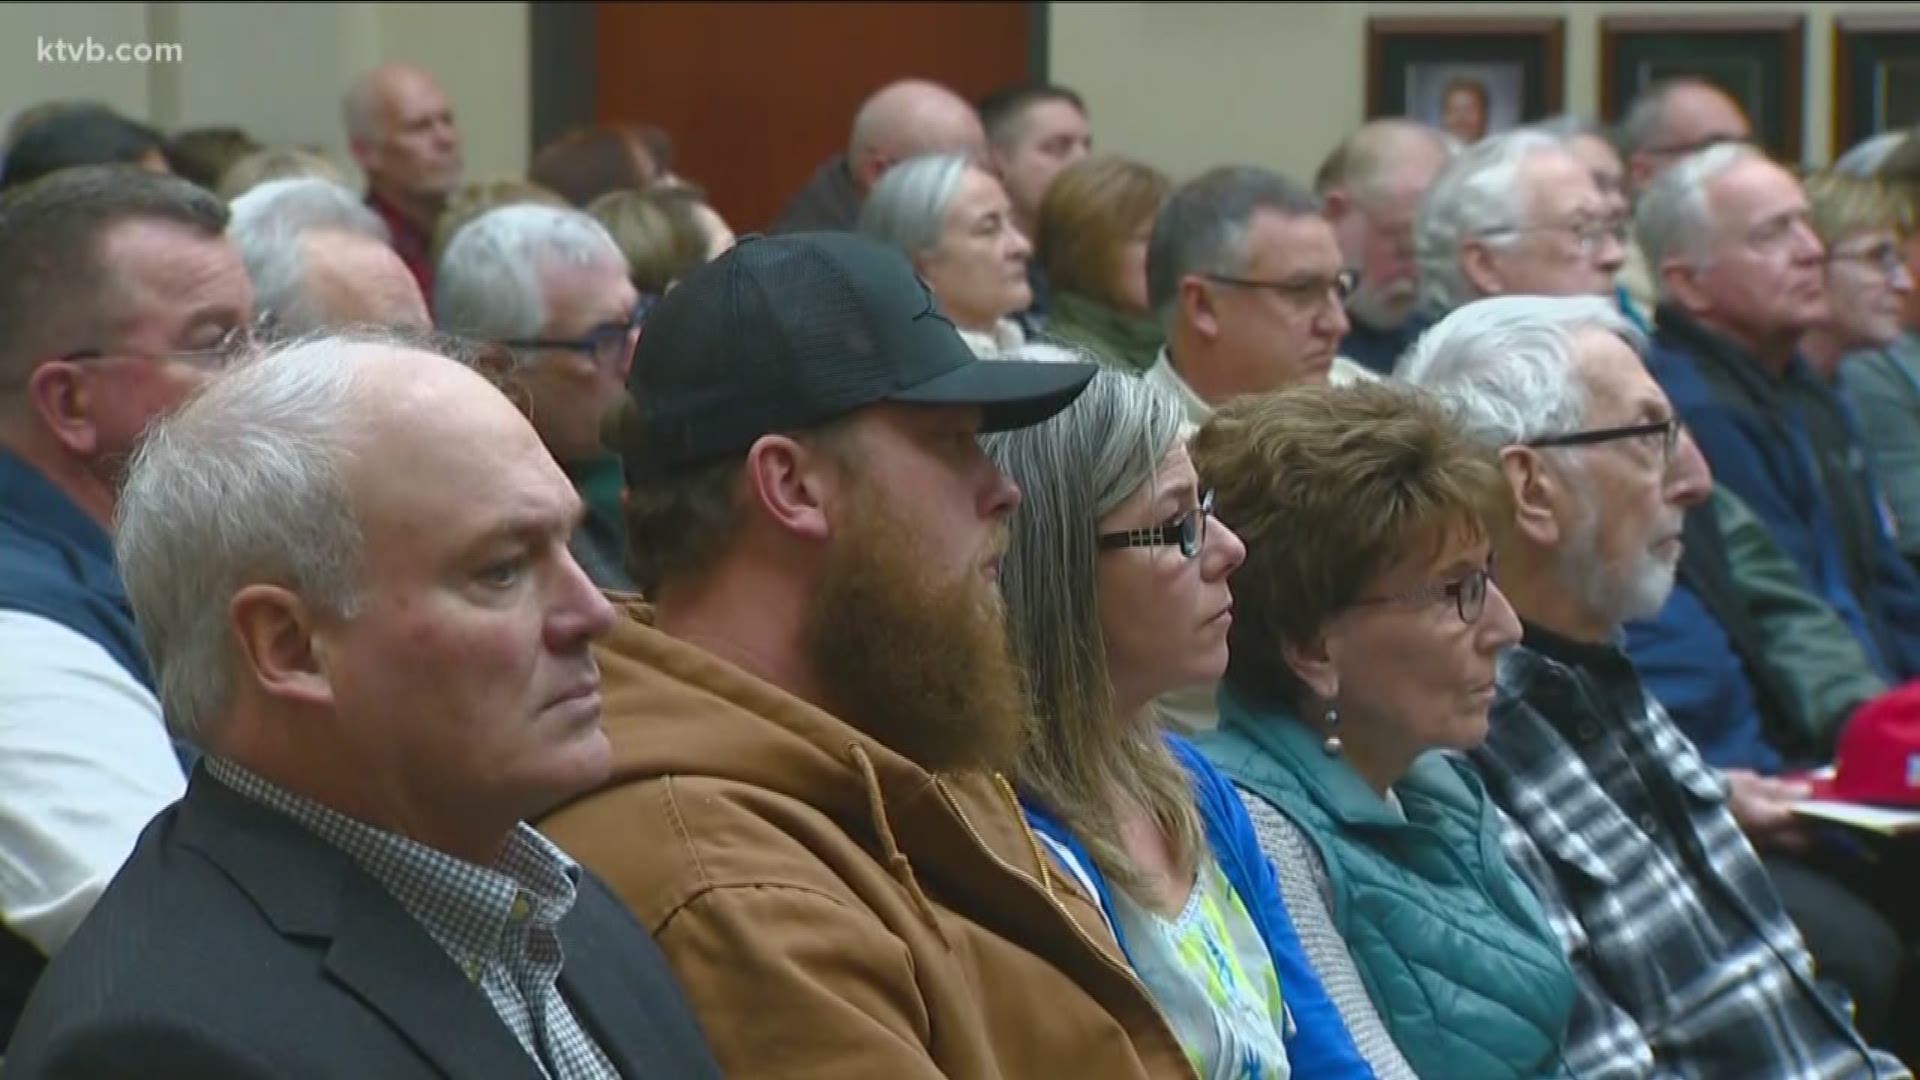 More than a hundred people turned up at Tuesday night's Eagle City Council meeting to weigh in on a plan to sell Eagle Water Company.